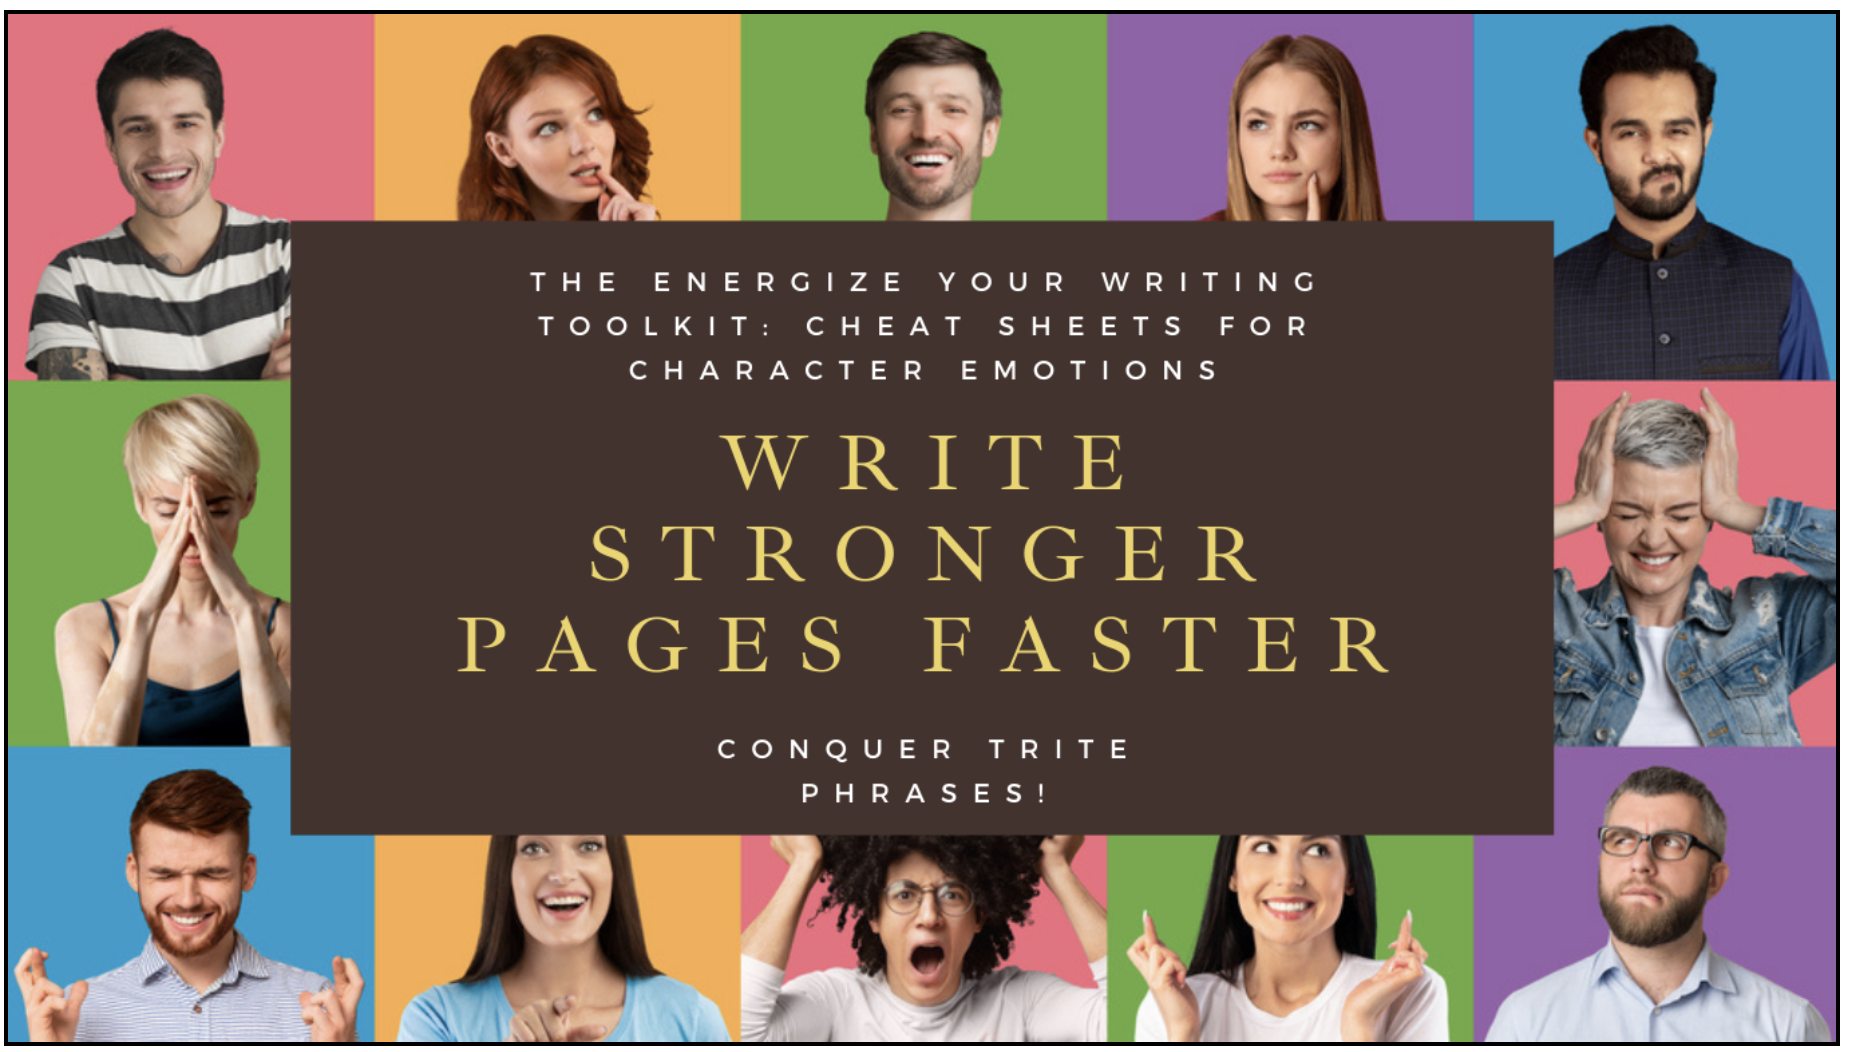 Win the Energize Your Writing Toolkit: Cheat Sheets for Character Emotions course